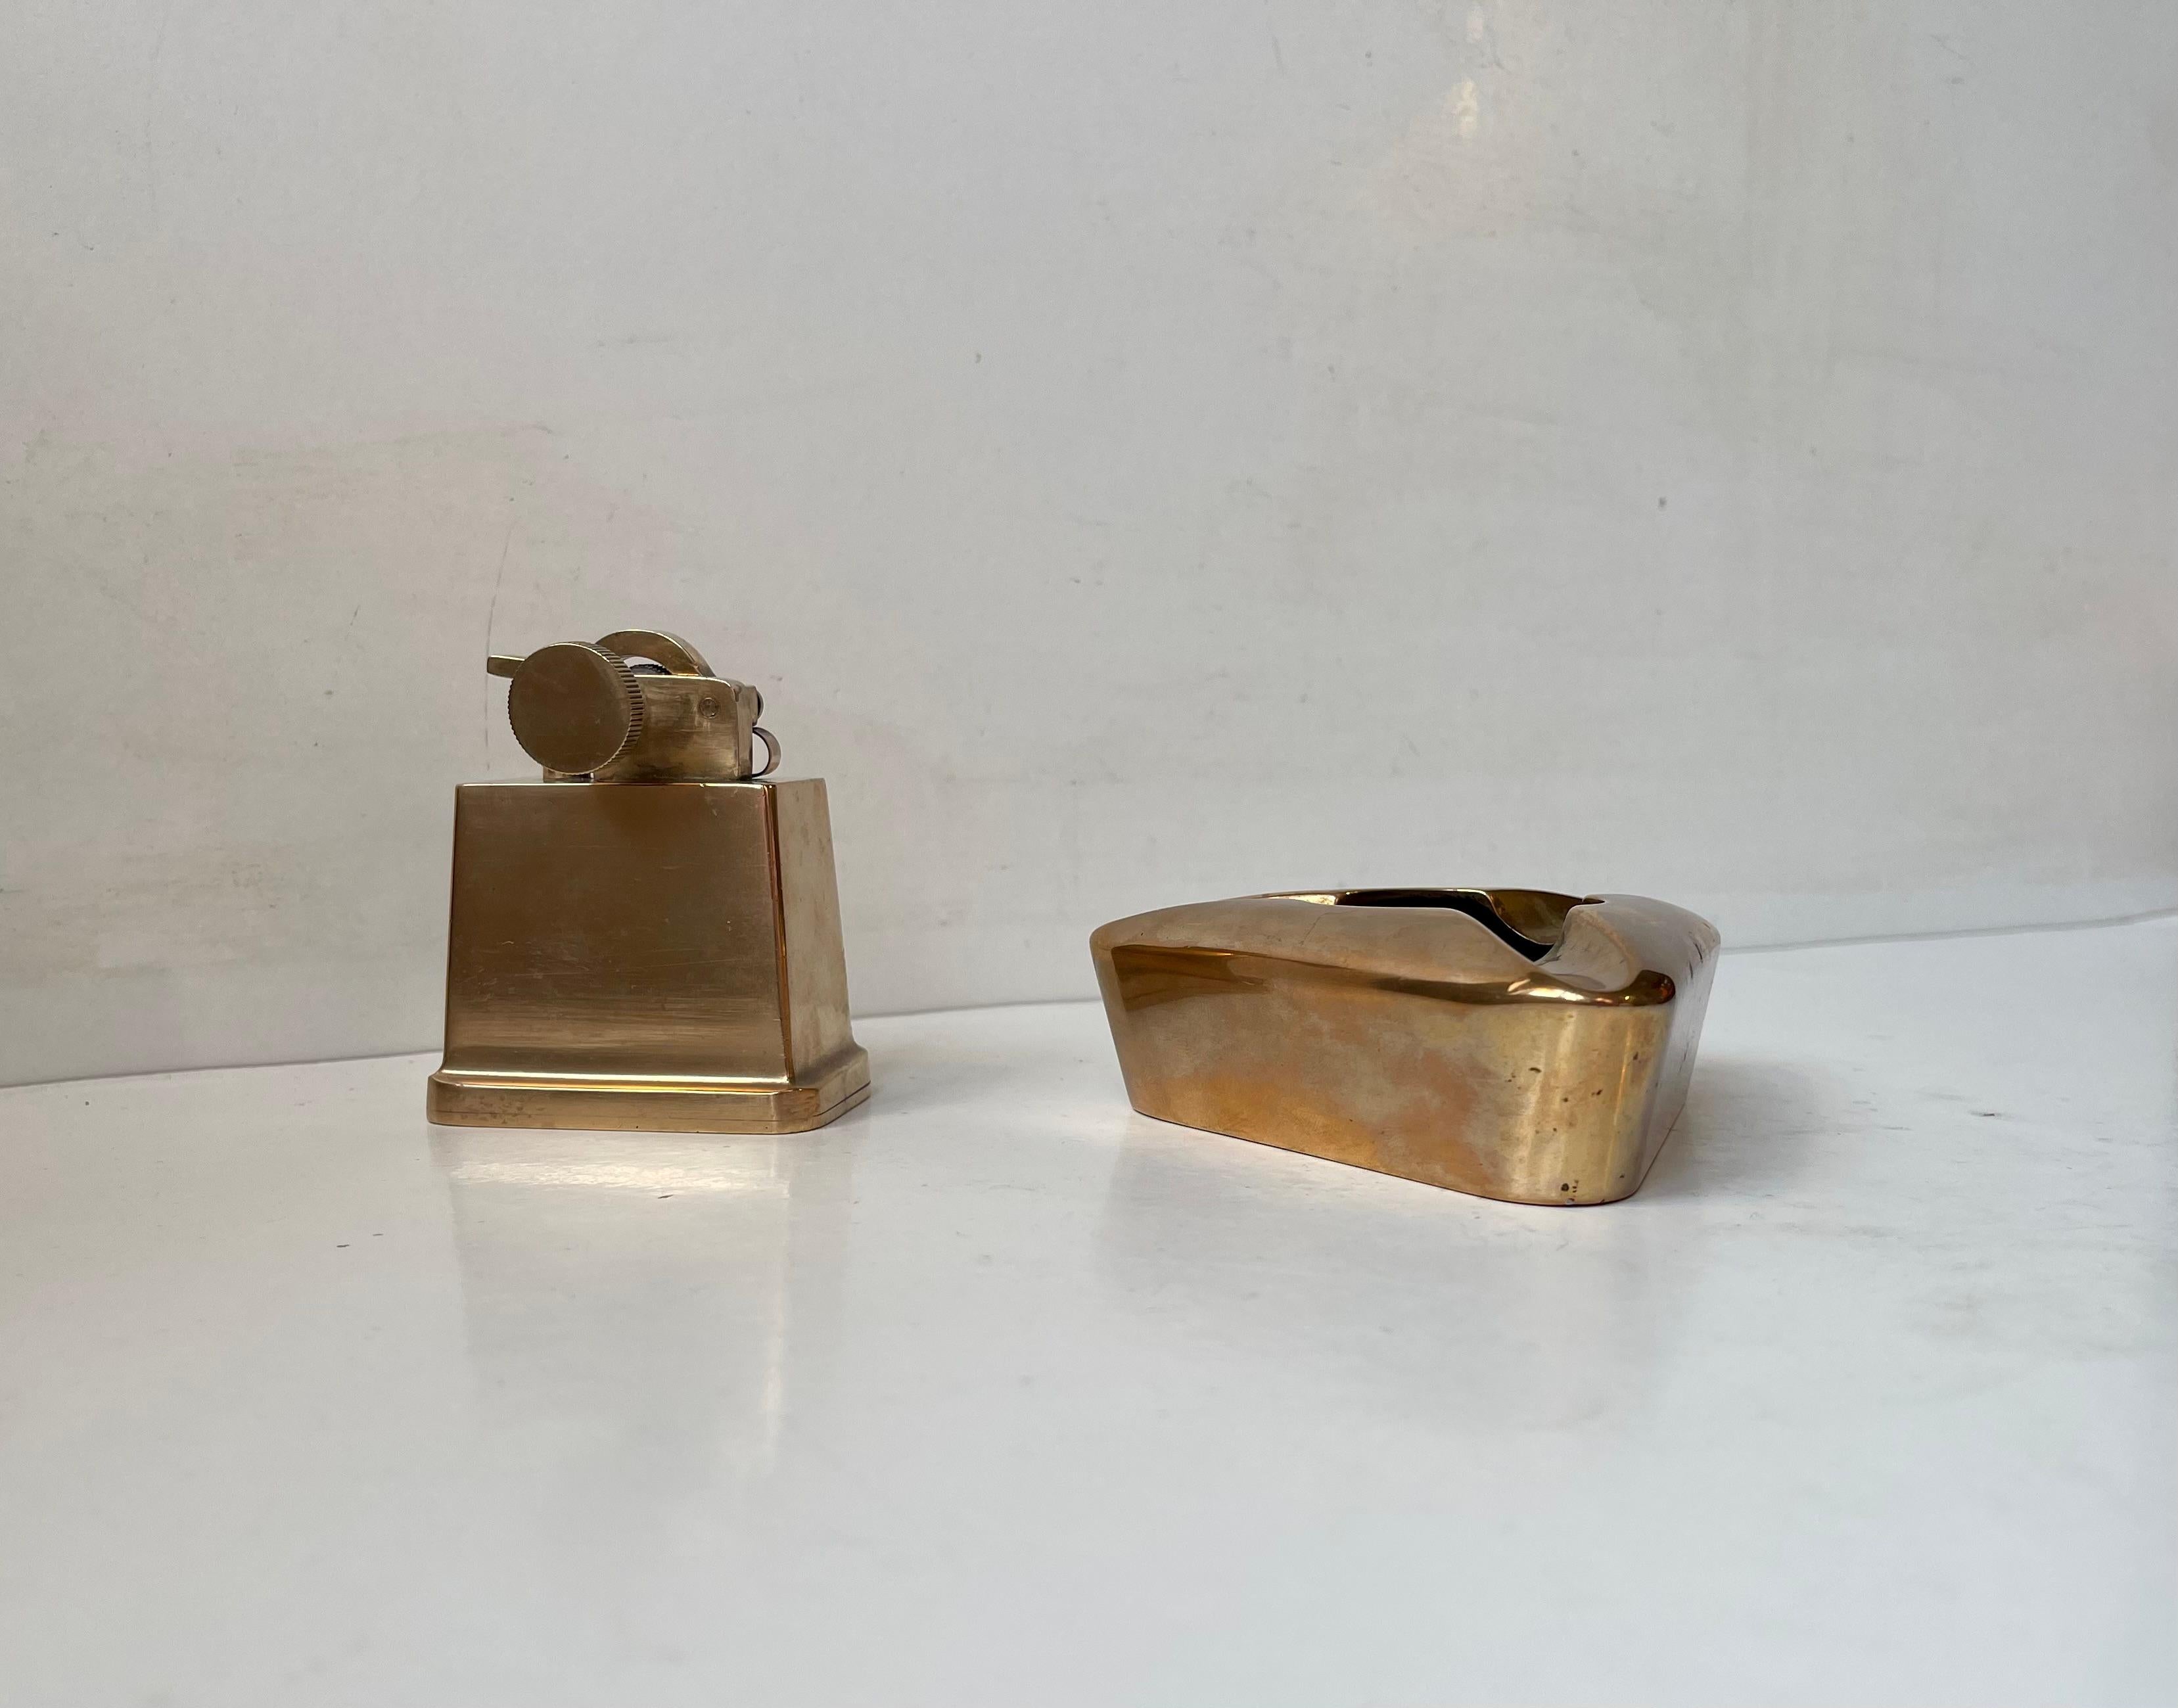 Literally built to last forever this mechanical paraffin table lighter by Tinos Copenhagen leaves no stones unturned. Very heavy solid bronze corpus, bronze liftarm and roll. It was made in the 1930s and the Art Deco styling is immense and